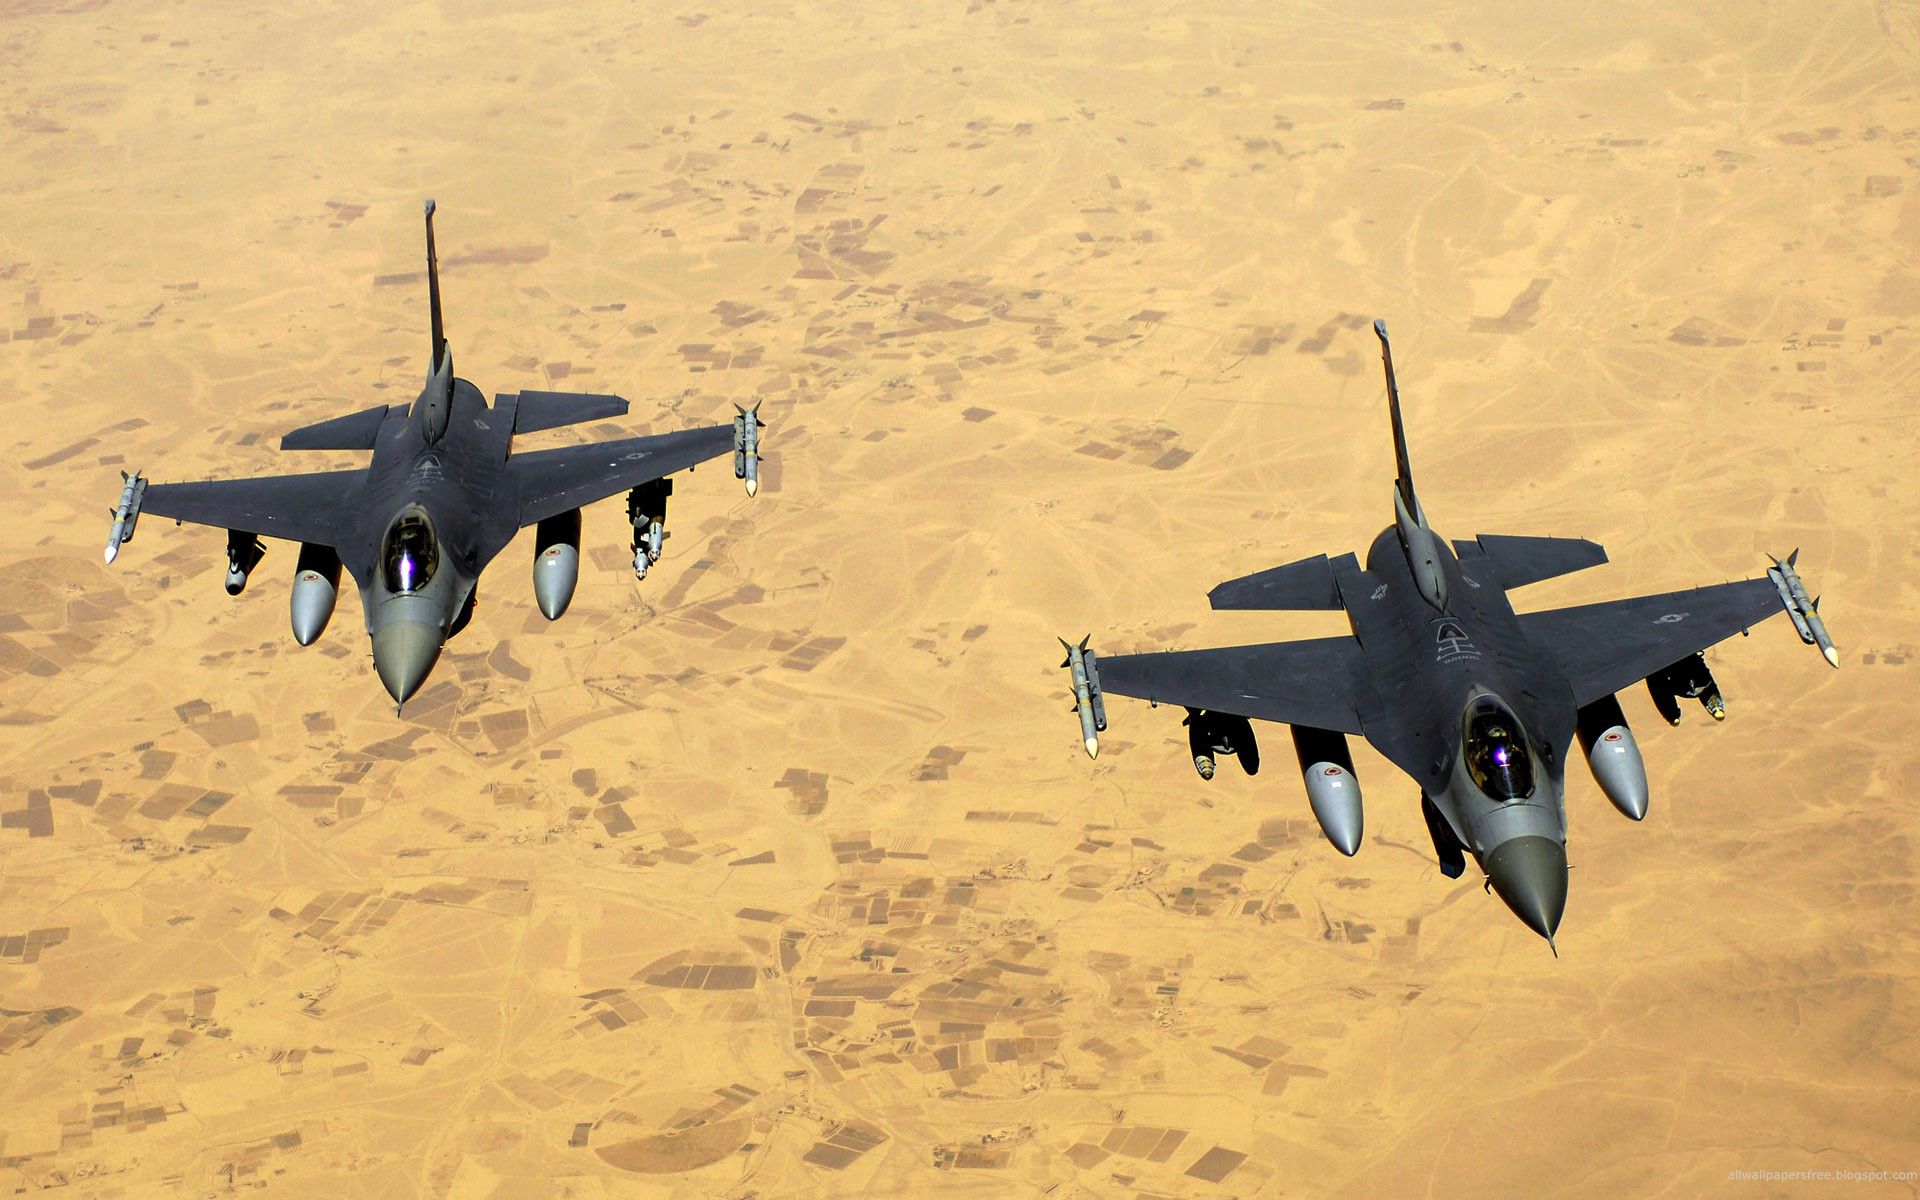 Fighter jets hd wallpapers on wallpapersafari fighter jets fighter planes jets fighter aircraft